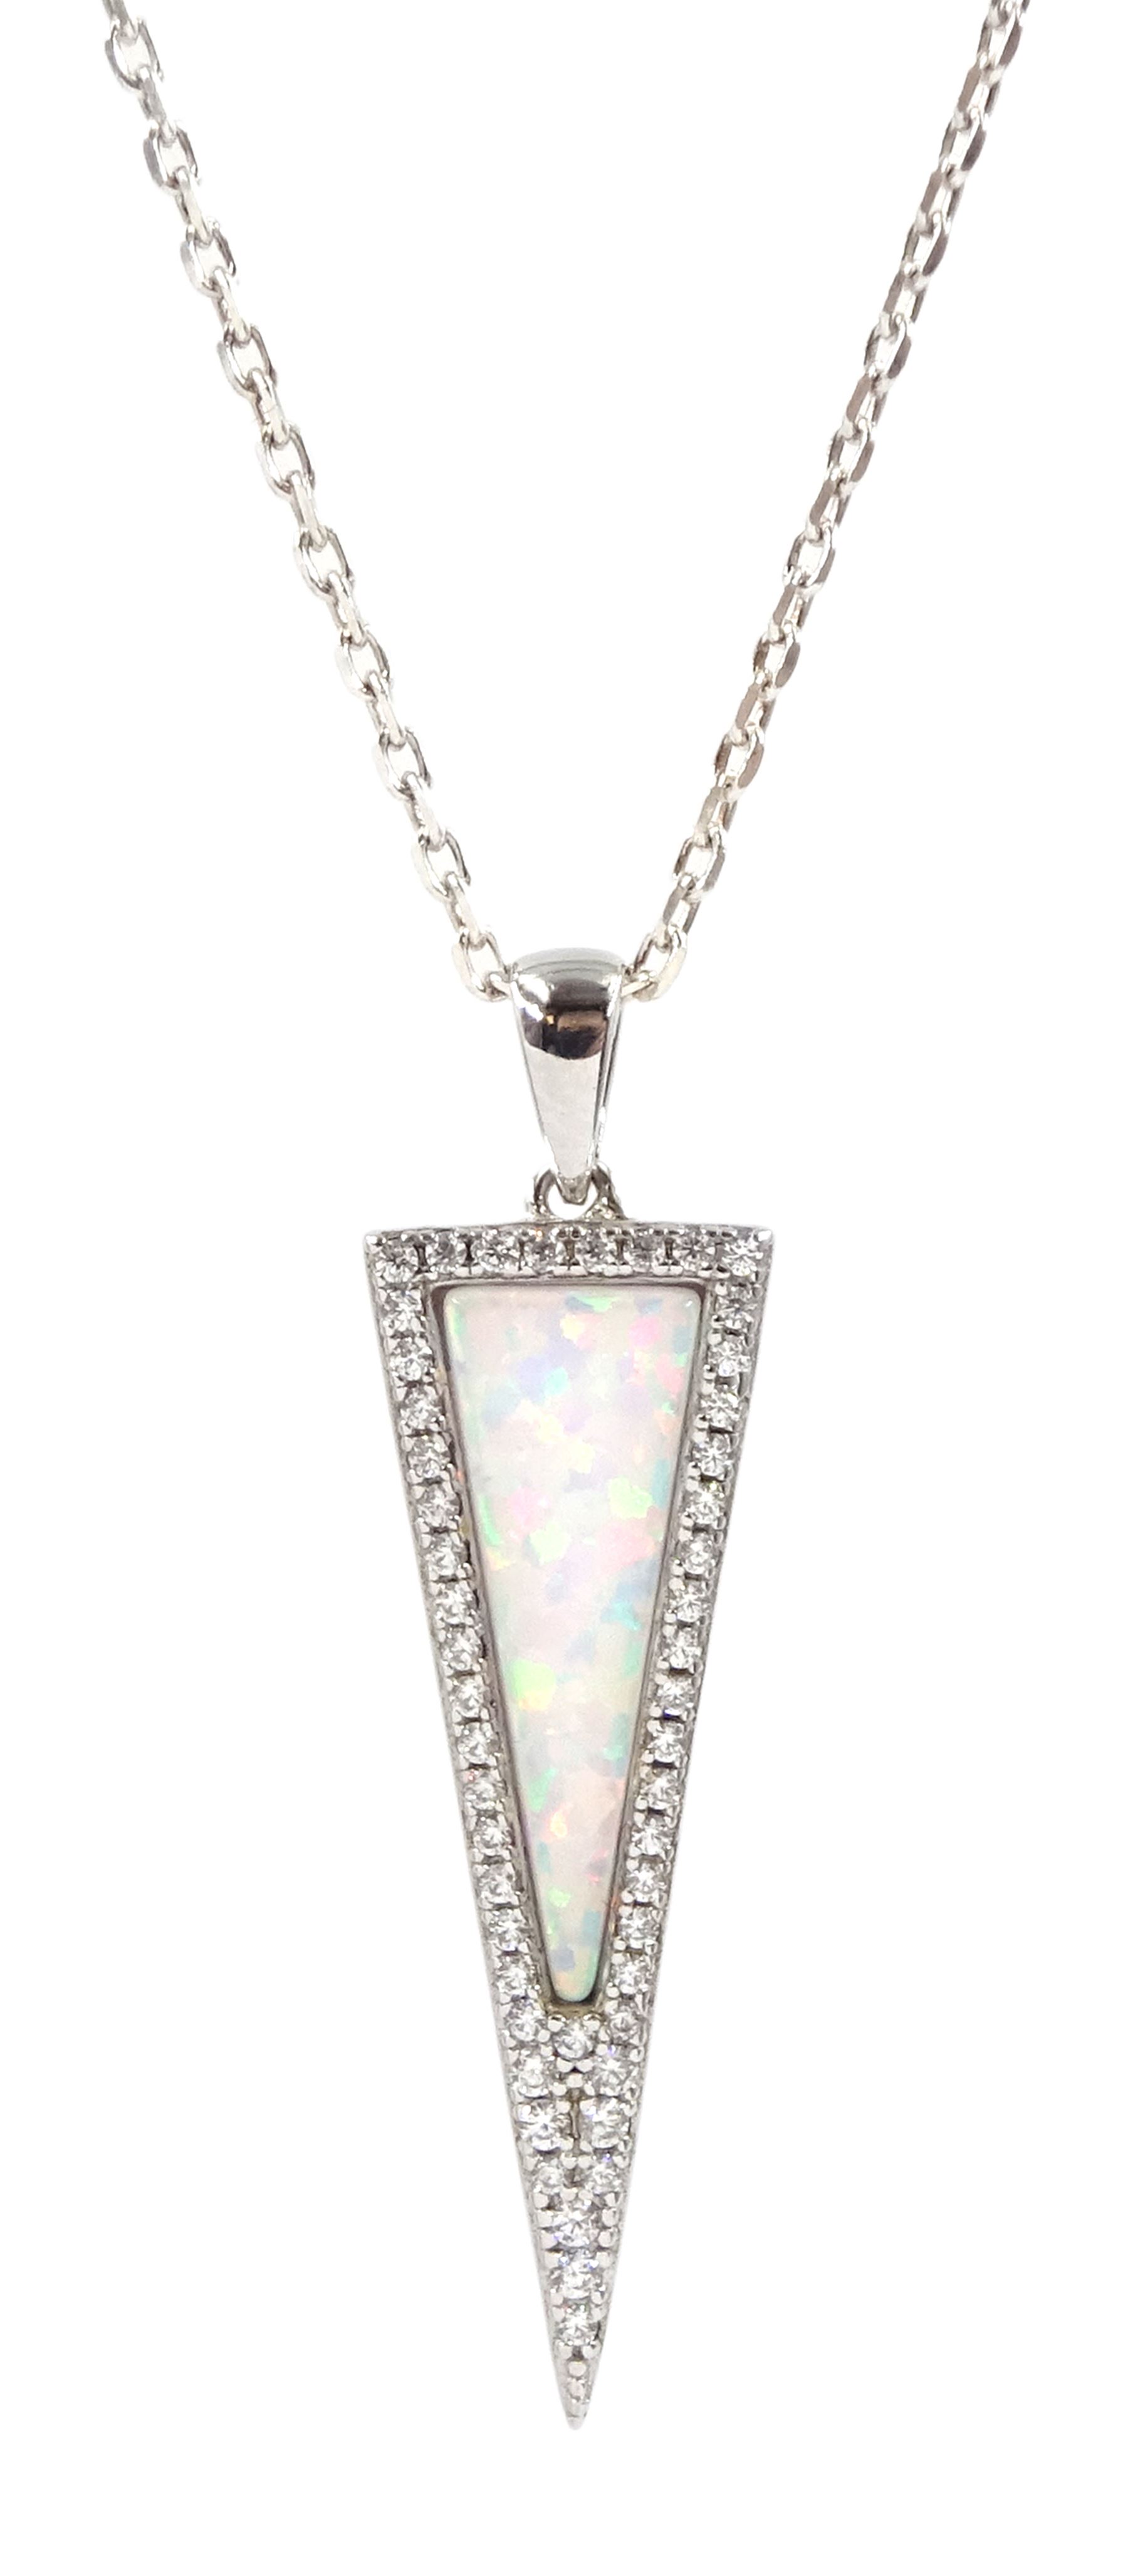 Silver opal and cubic zirconia triangle pendant necklace